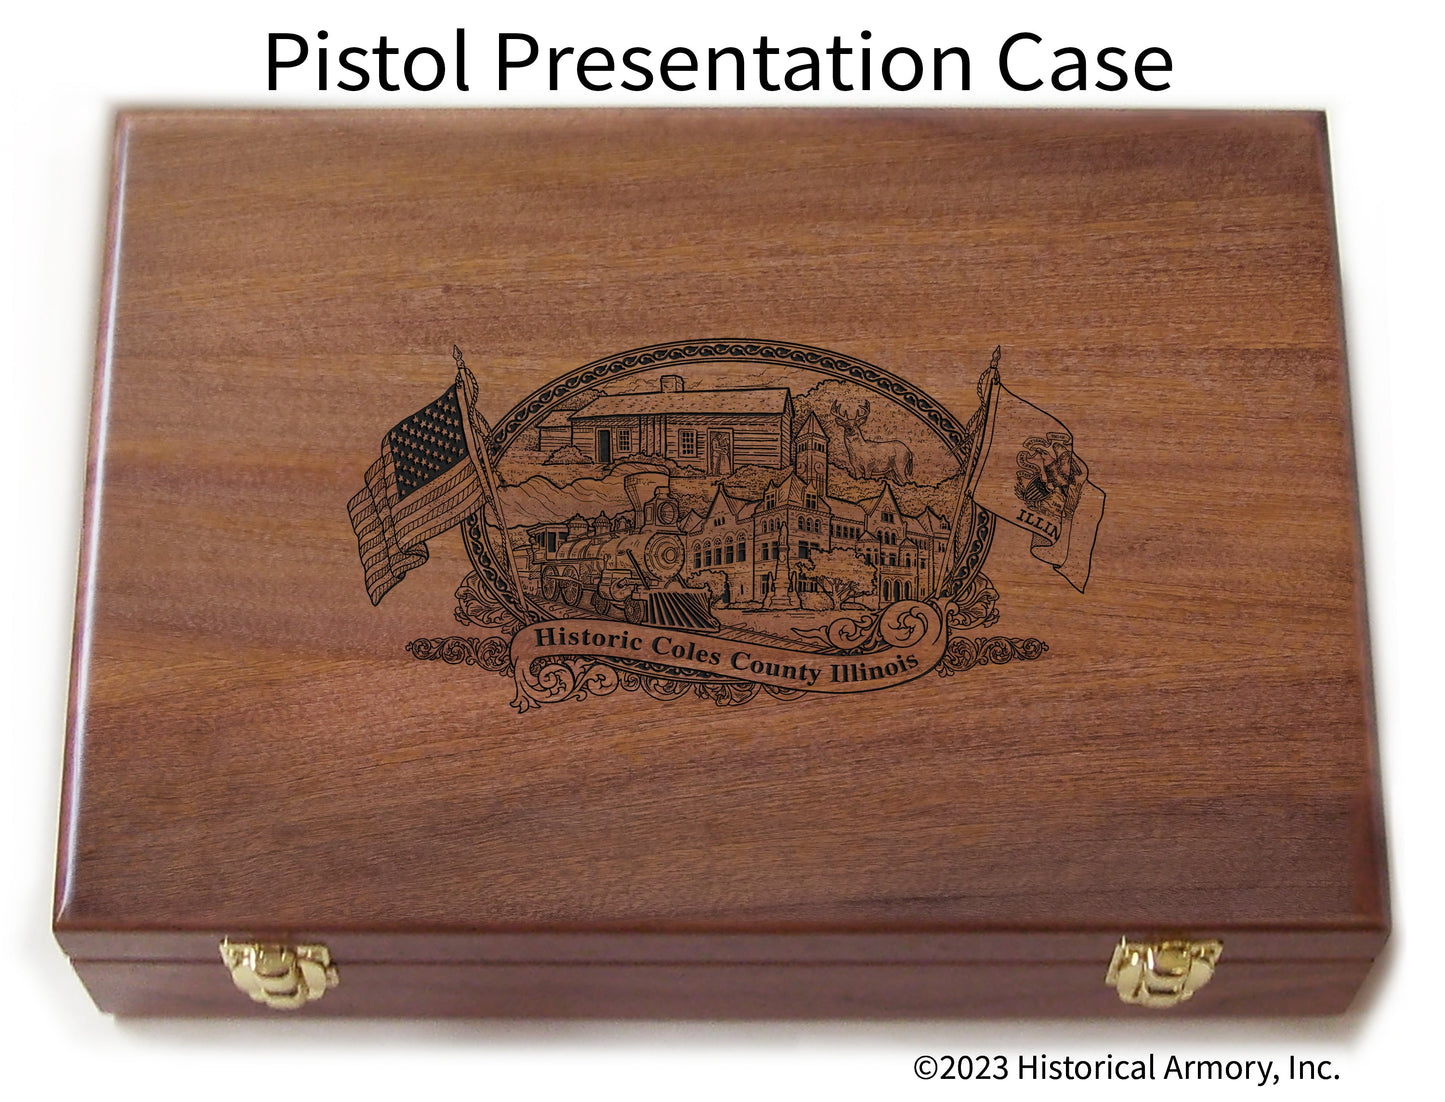 Coles County Illinois Engraved .45 Auto Ruger 1911 Presentation Case